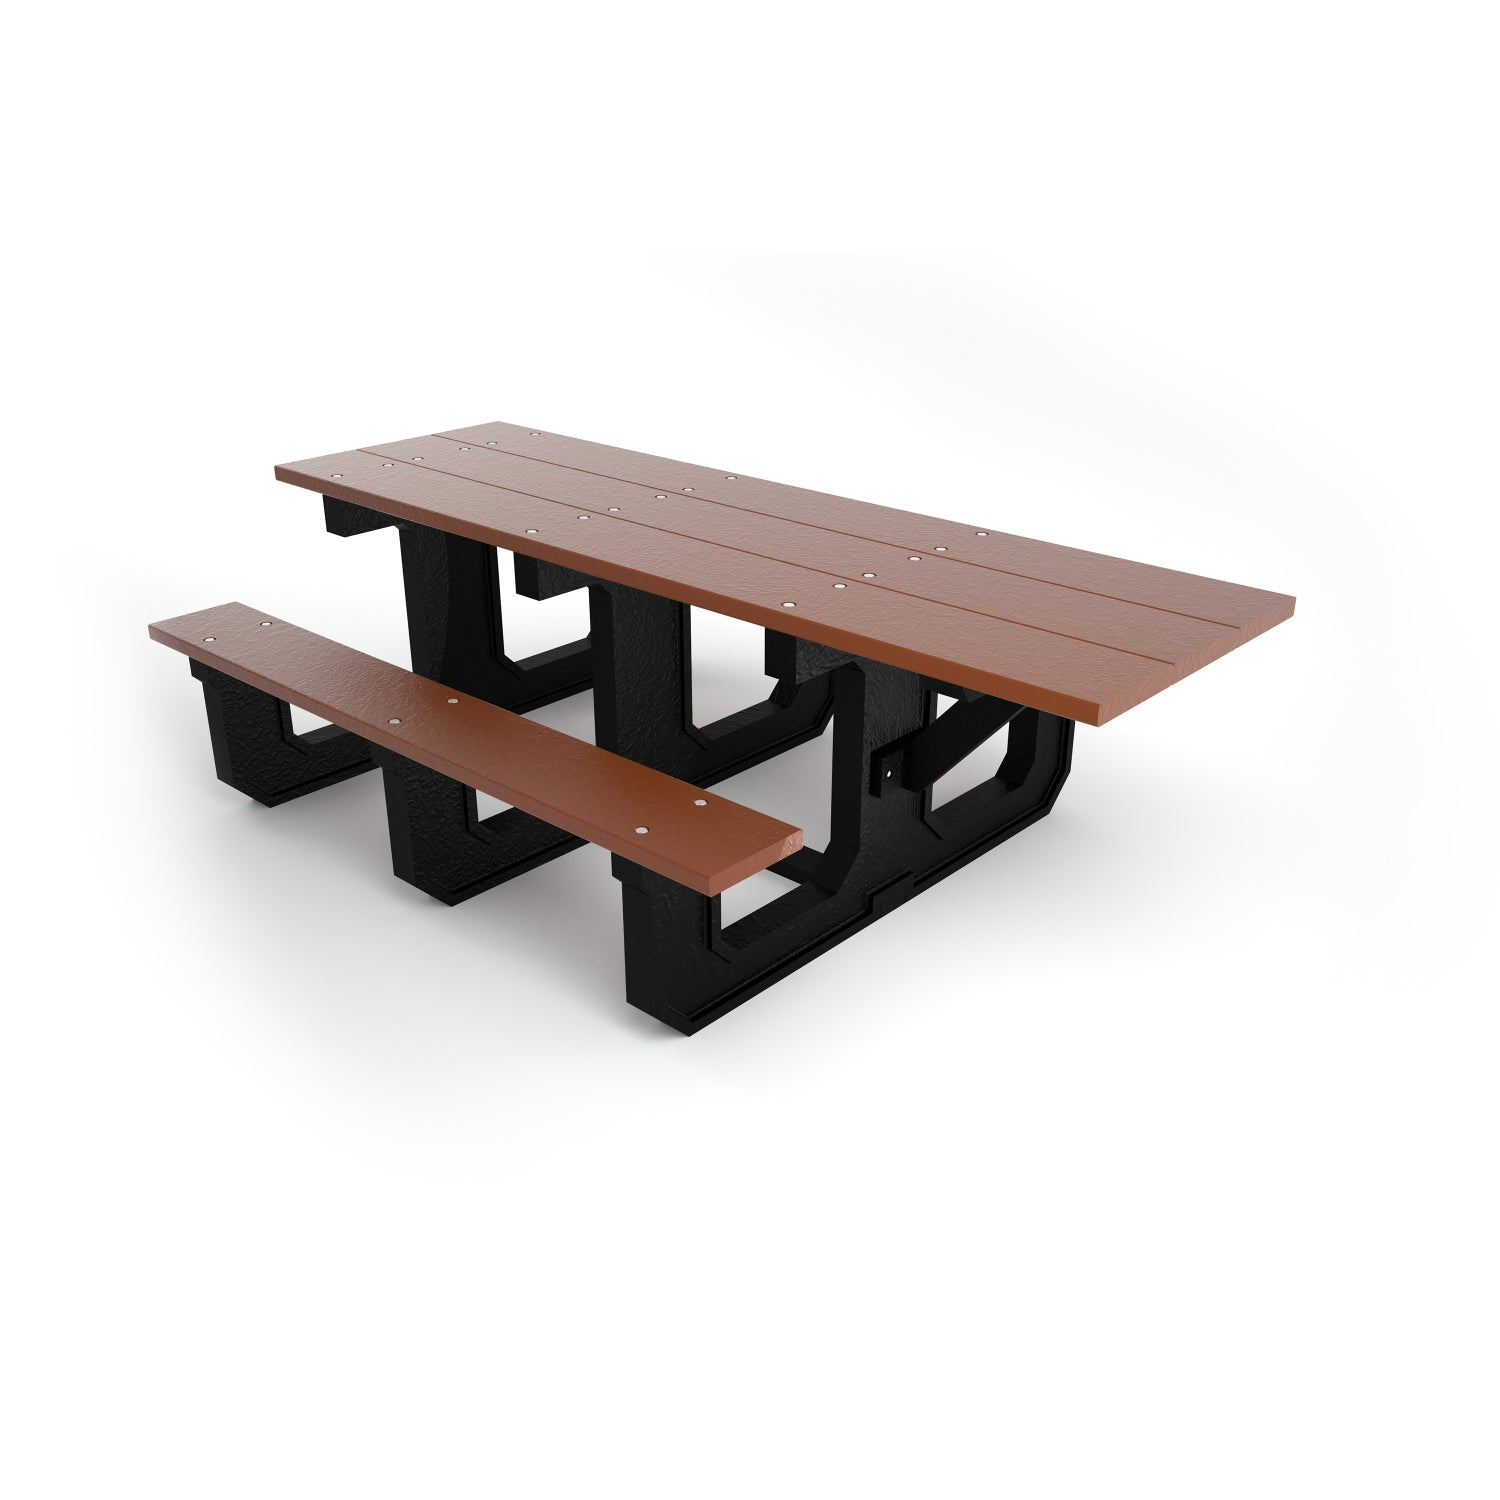 Frog Furnishings Park Place Resinwood ADA Outdoor Picnic Table, 6 Ft. Long